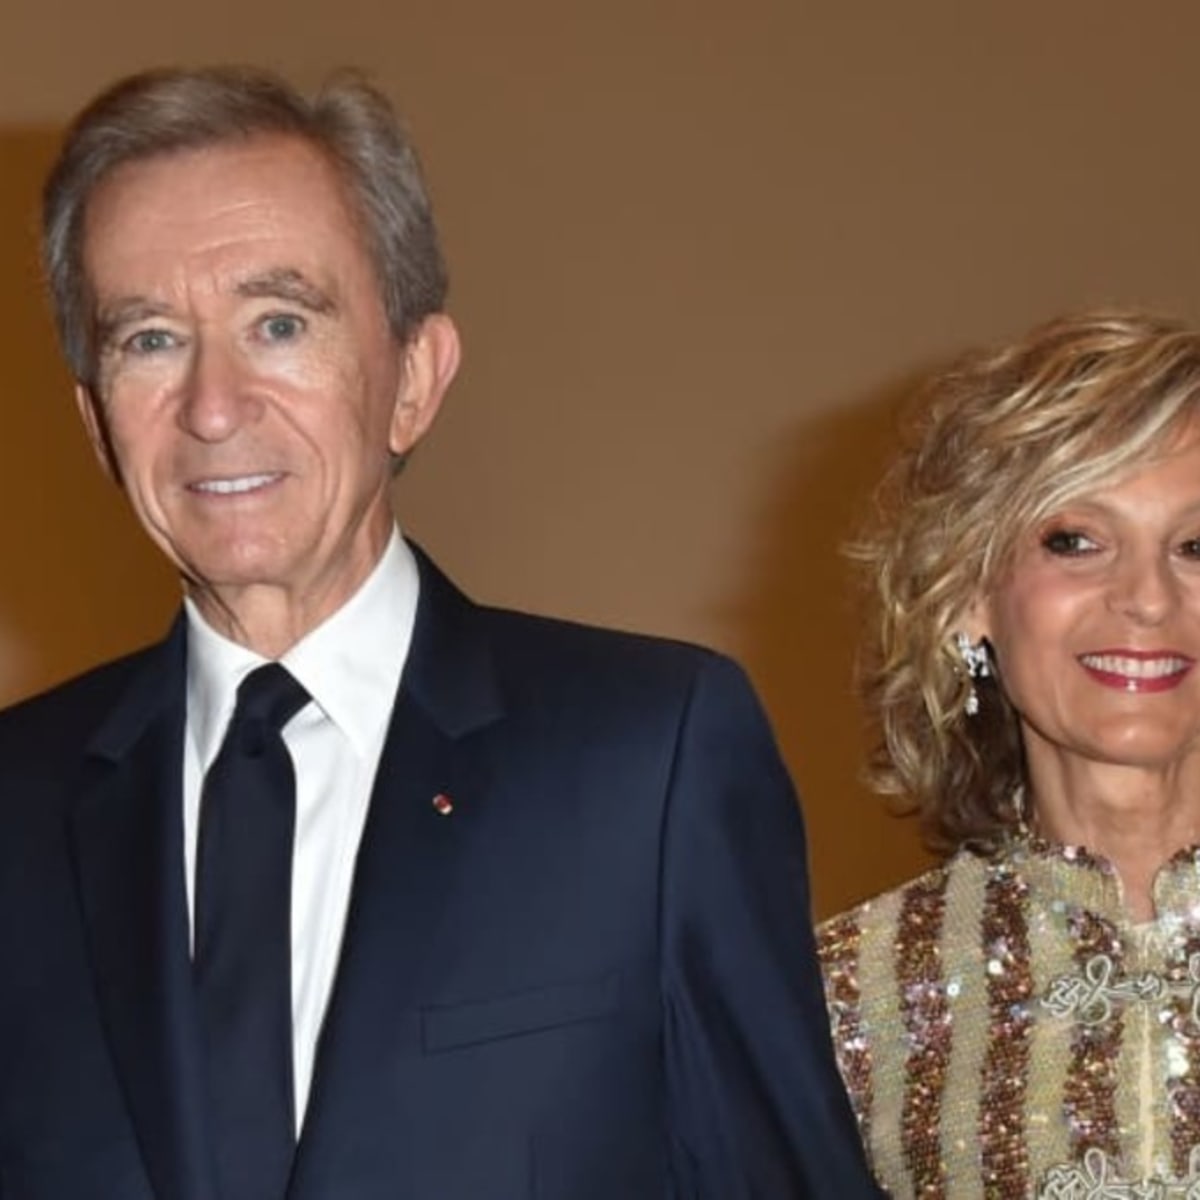 Bernard Arnault: The Frenchman who has everything - except Belgian